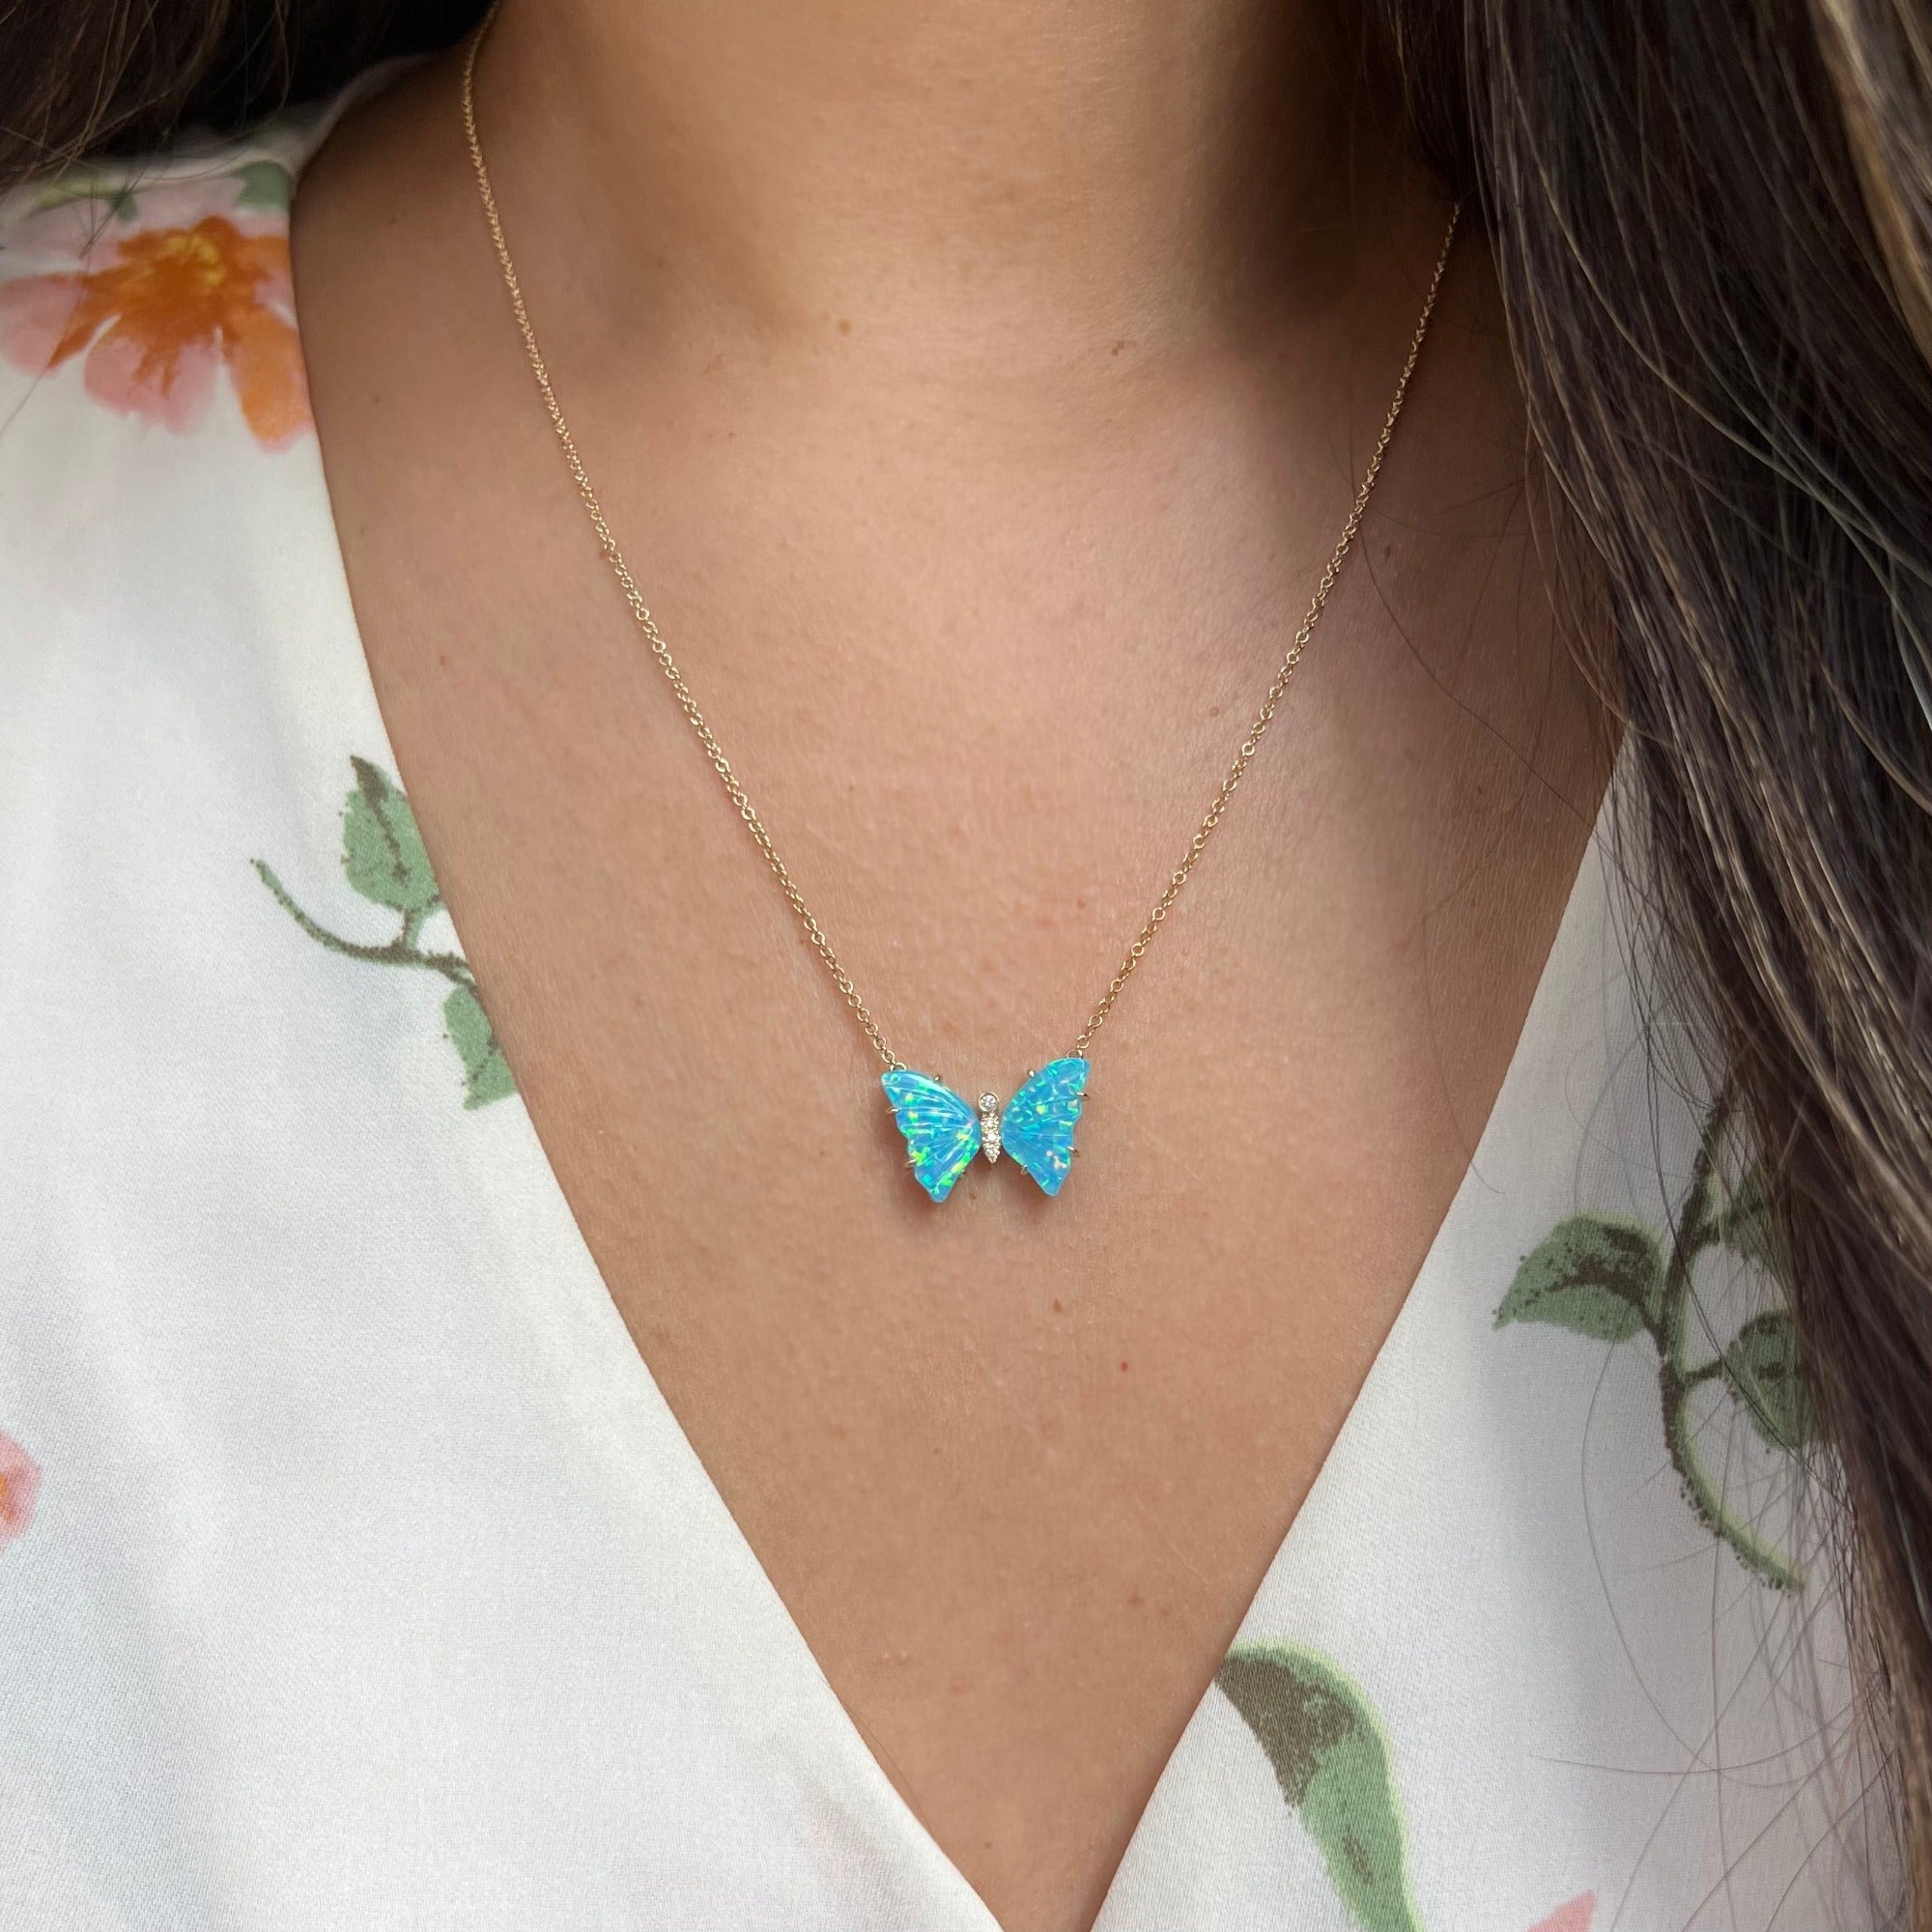 mini pronged butterfly necklace with diamonds in turquoise opal